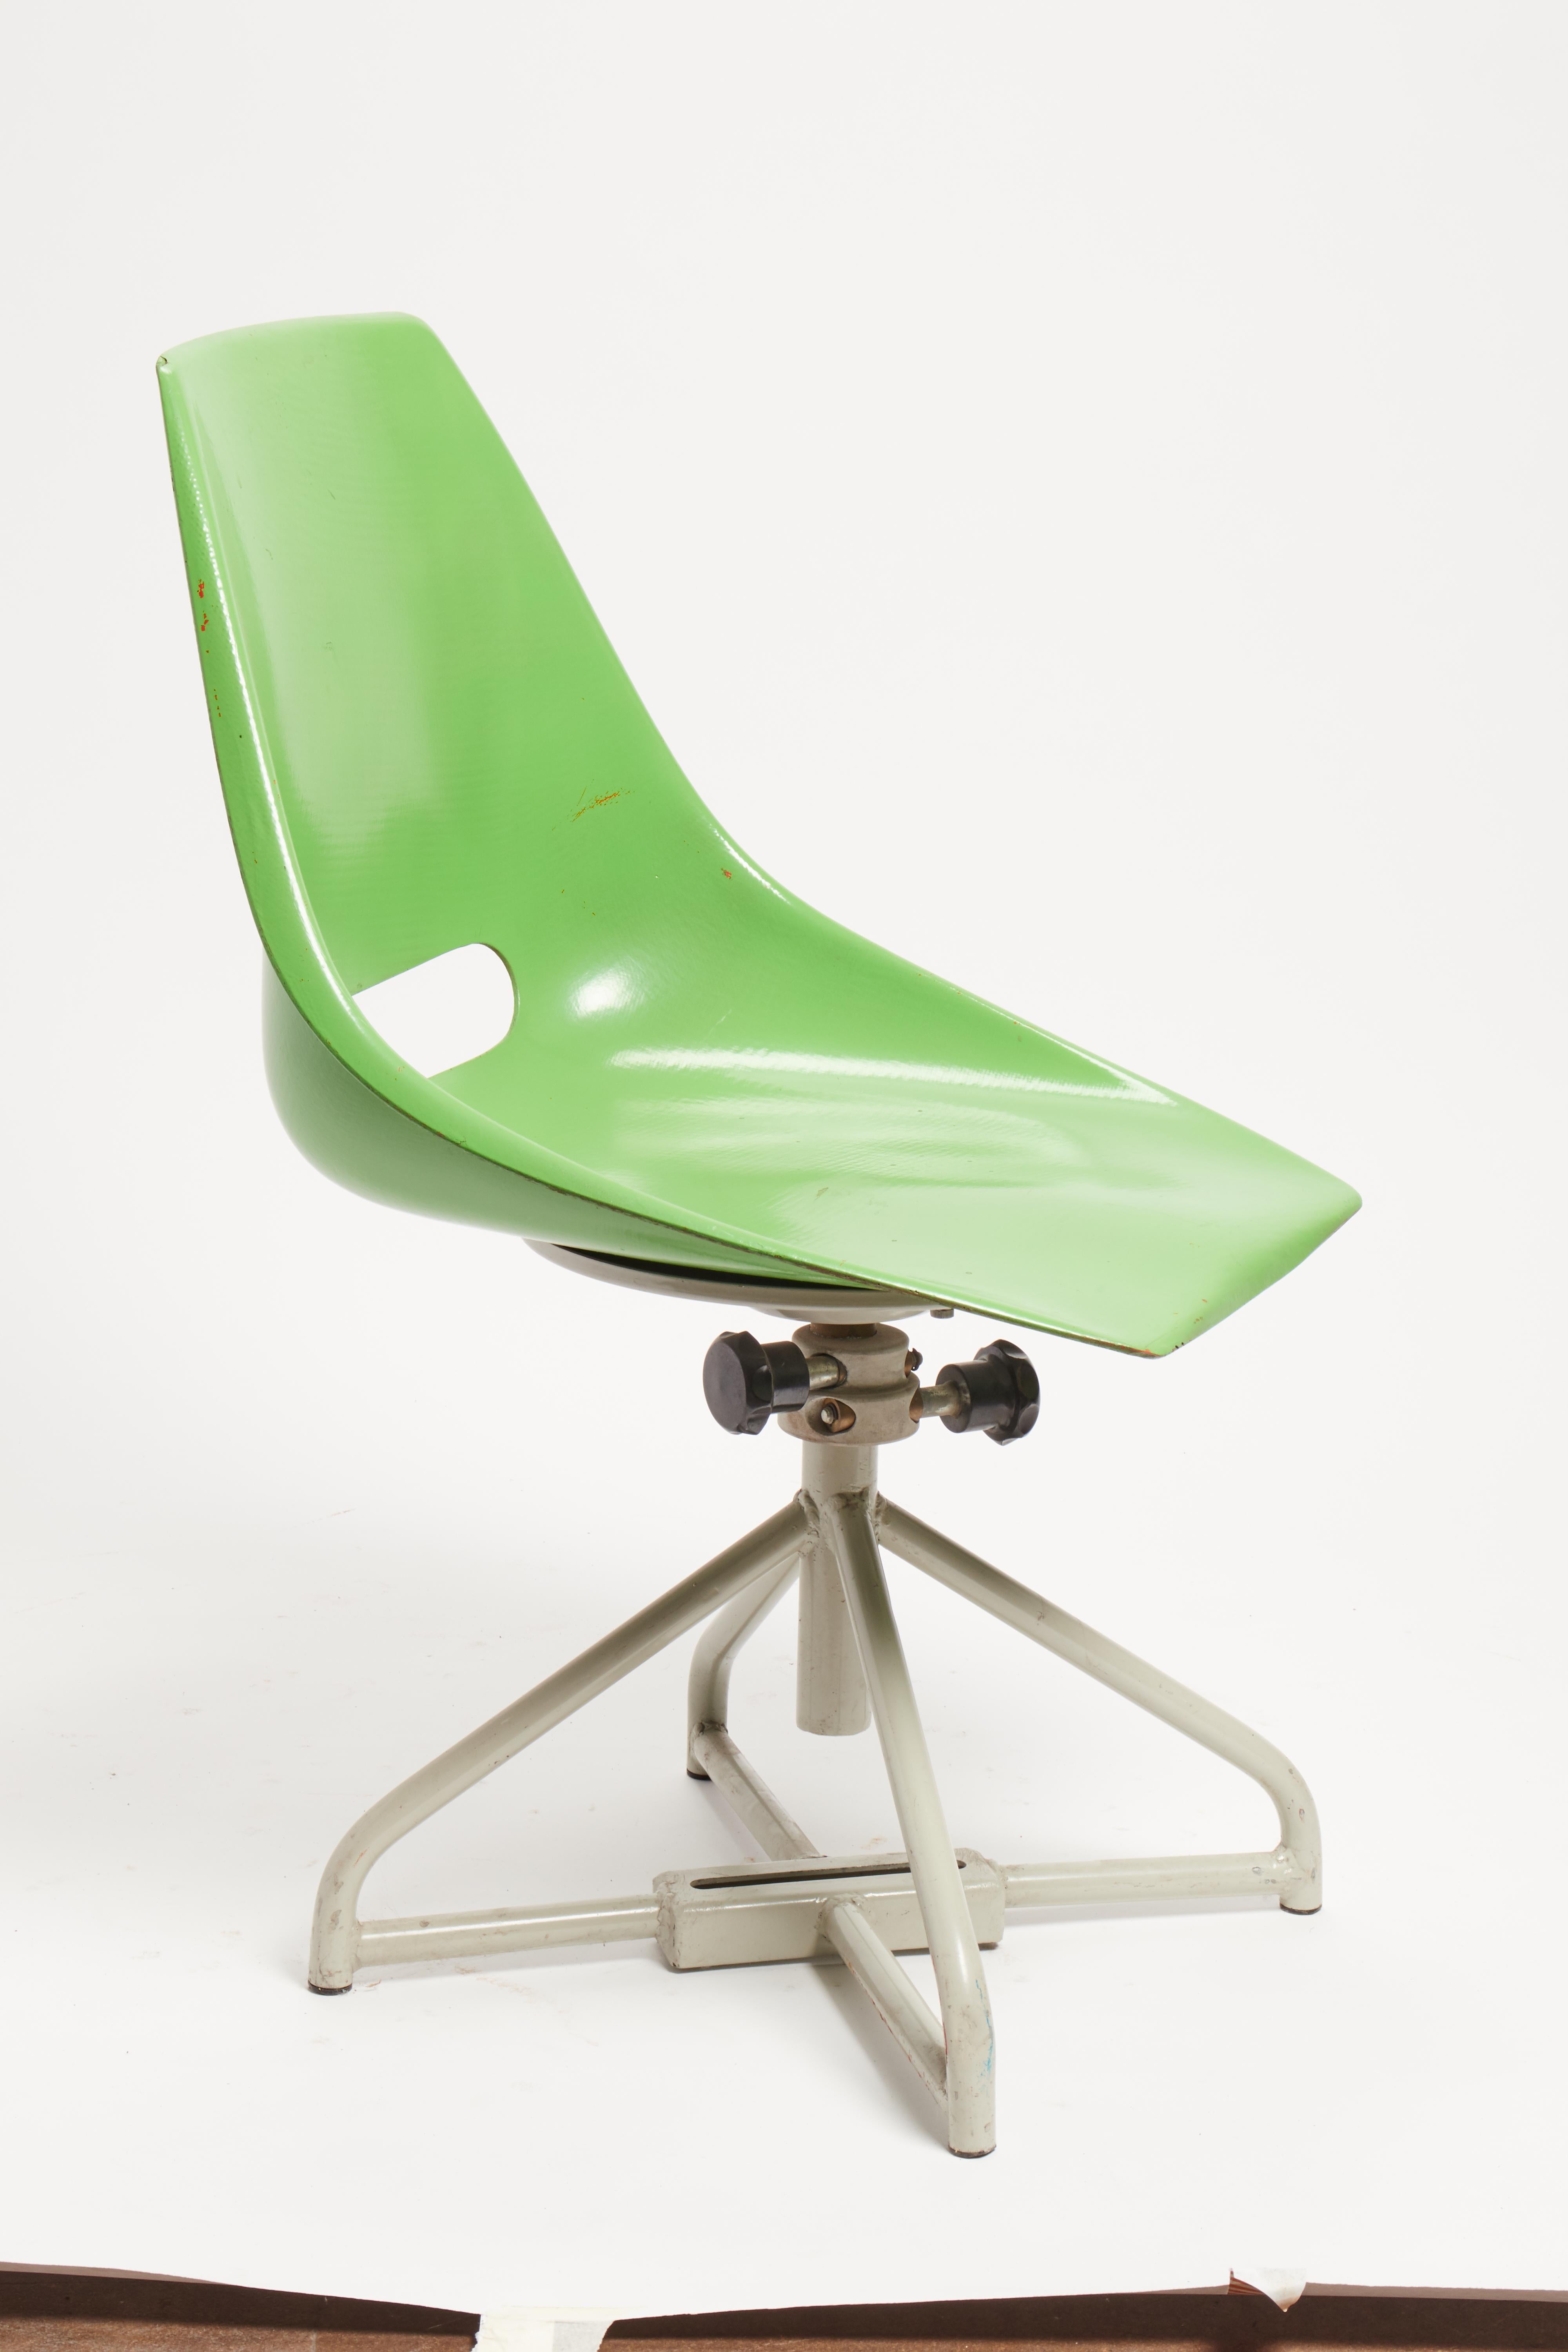 Multicolor Adjustable Fiberglass Chairs, Italy, 1950 For Sale 3